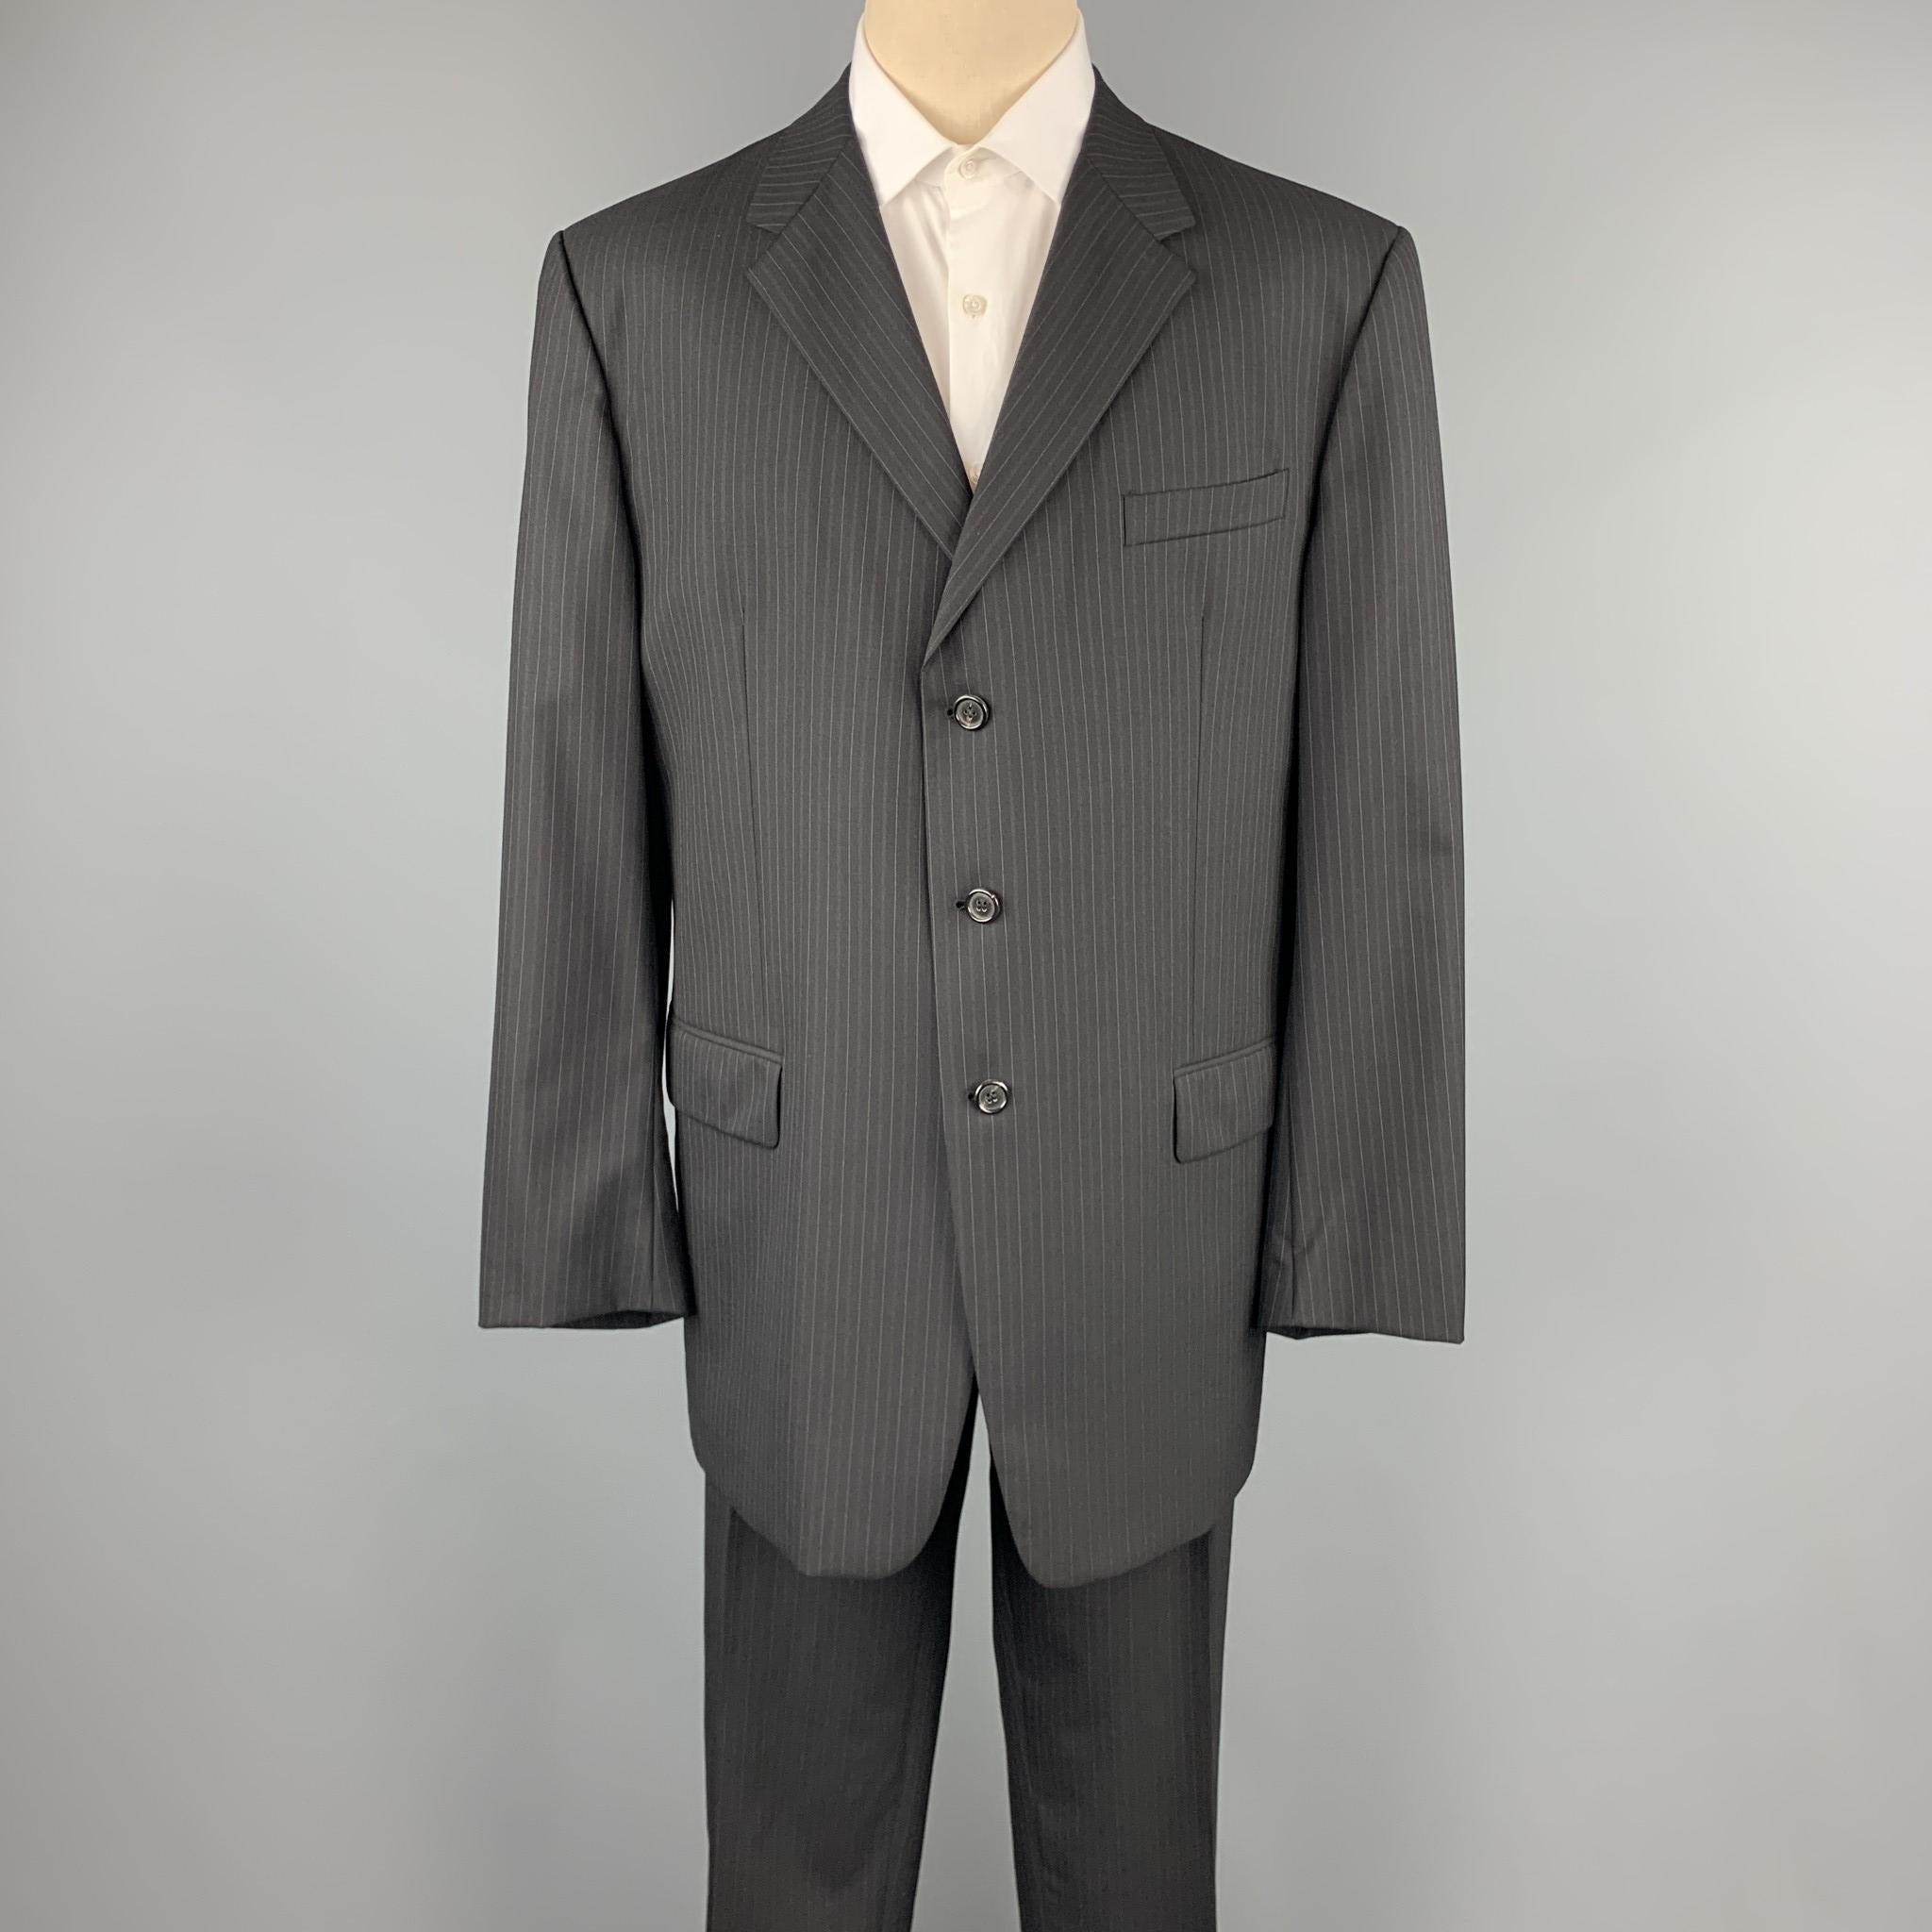 PRADA suit comes in a black stripe wool and includes a single breasted, three button sport coat with notch lapel and matching flat front trousers. Made in Italy.

Excellent Pre-Owned Condition.
Marked: IT 58 L 

Measurements:

-Jacket
Shoulder: 19.5